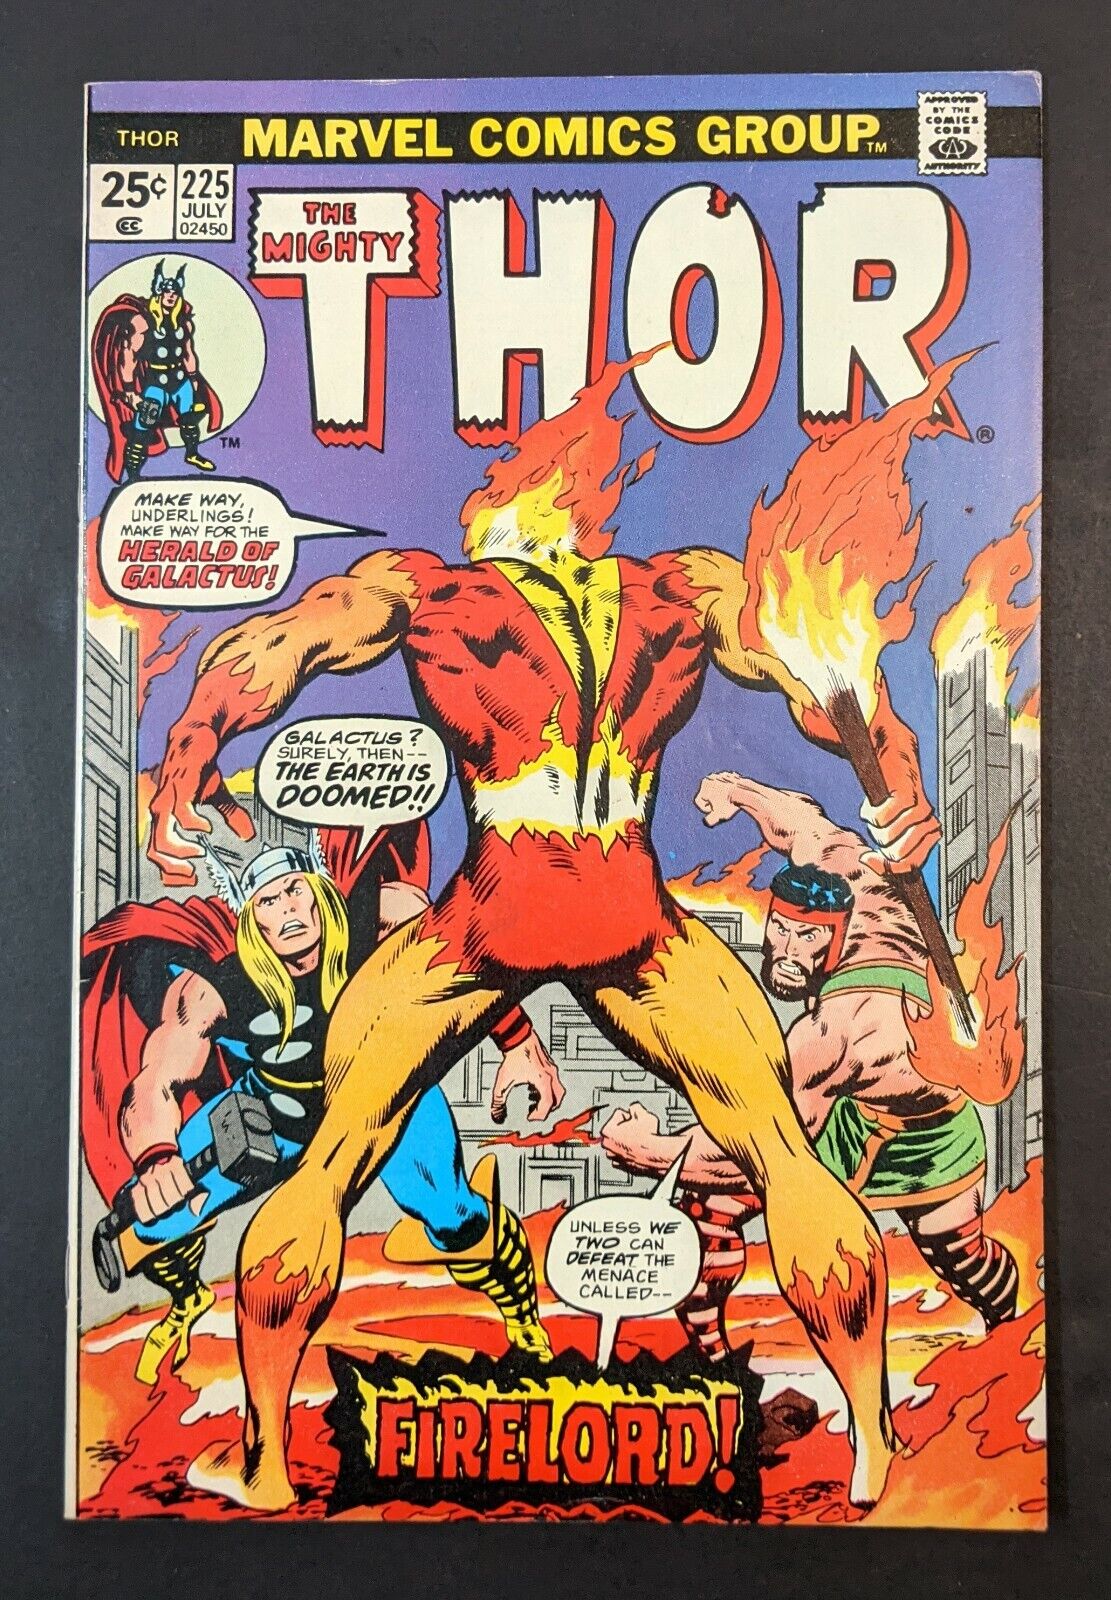 The Mighty Thor #225 (Jul 1974) VF+ Uncertified, ungraded. Superb comic book